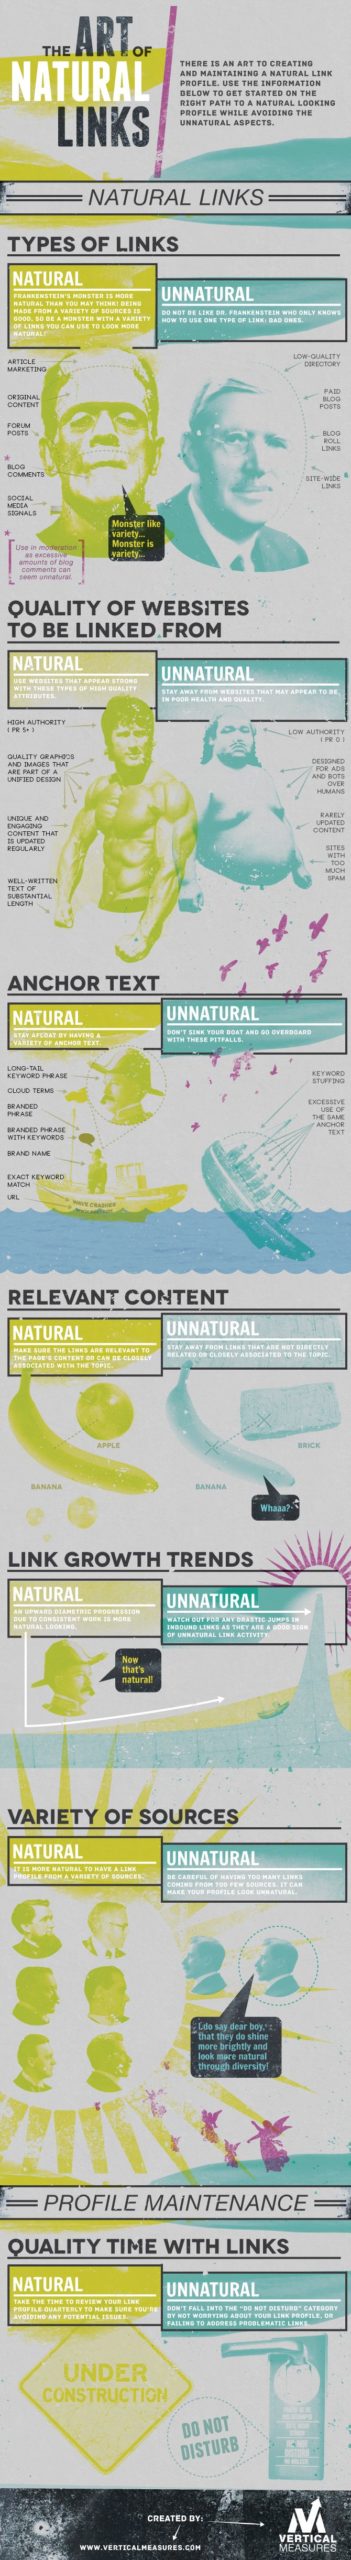 The Art of Natural Links [INFOGRAPHIC]